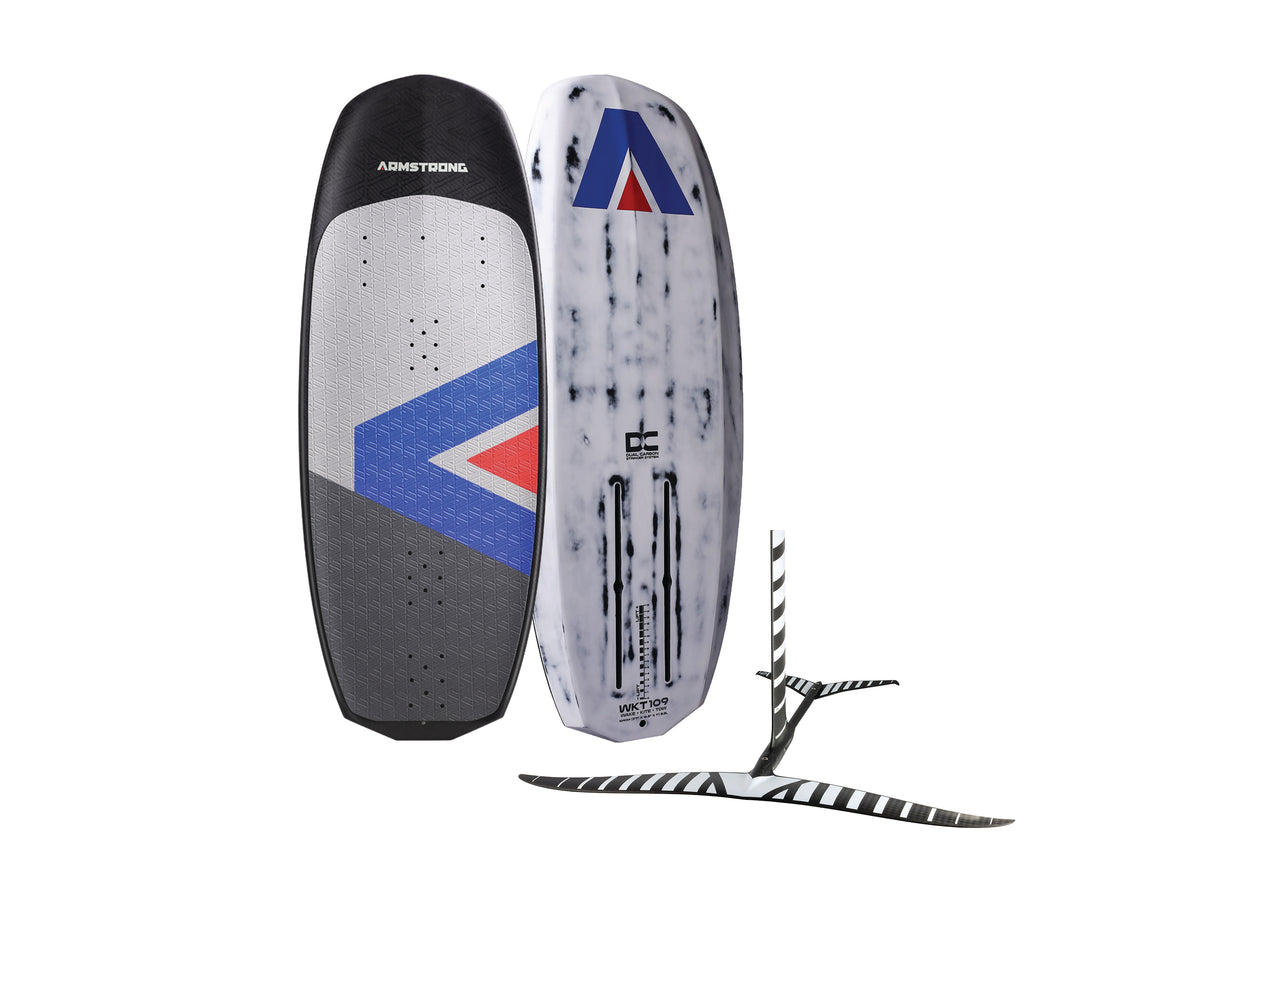 Armstrong Wakefoil Board W/ Armstrong HA925 Foil Kit Package